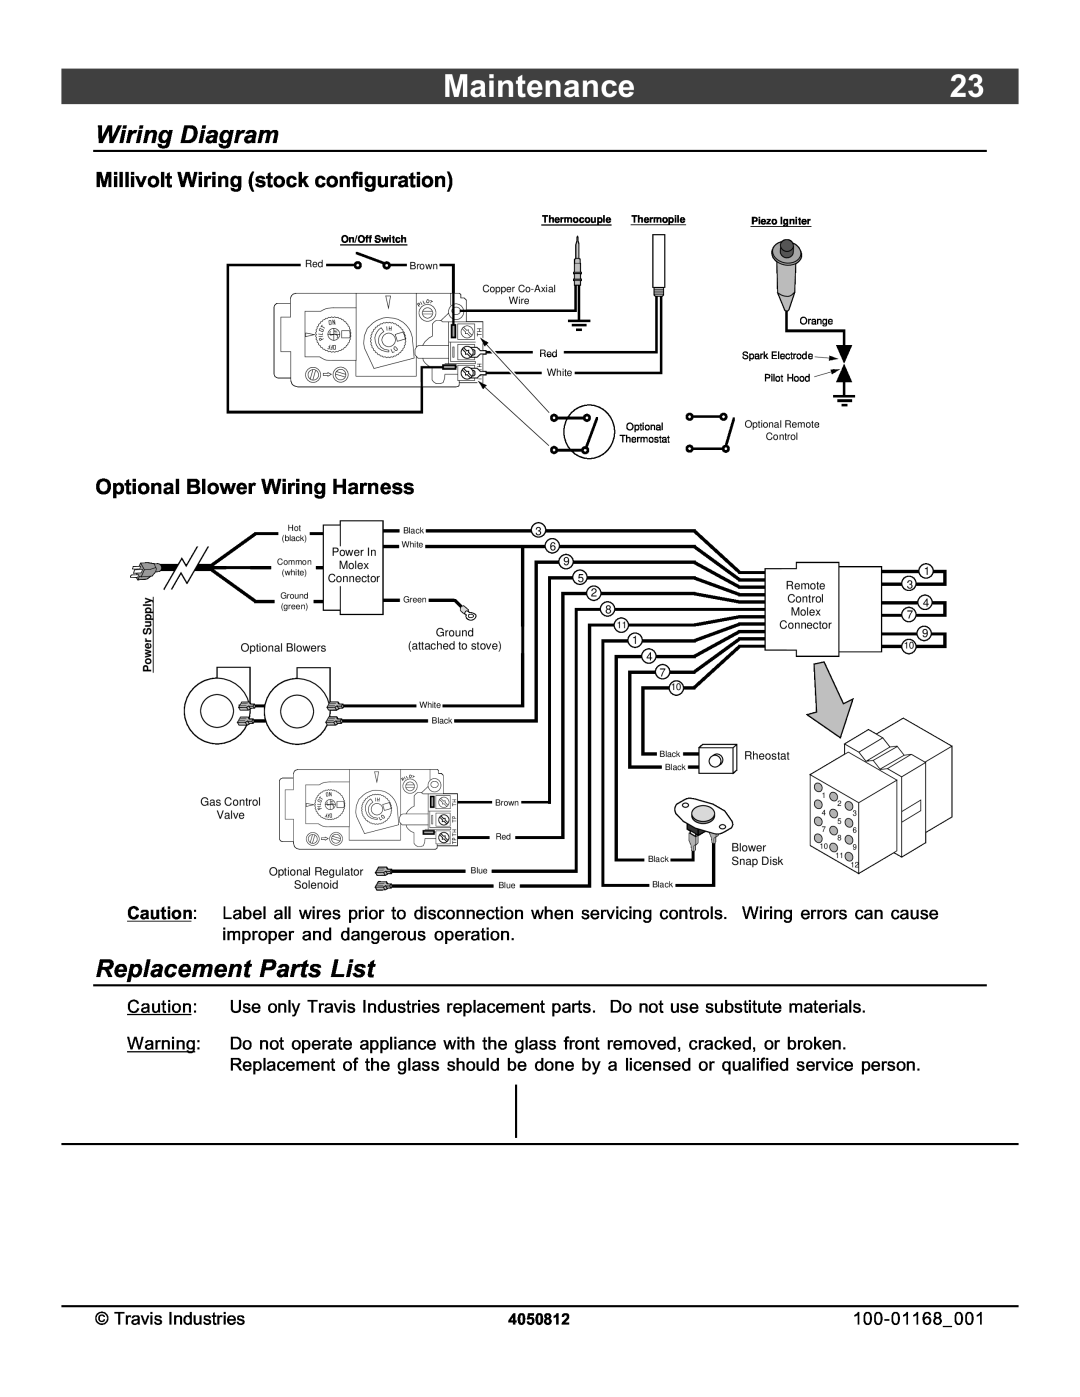 Lopi 864TRV owner manual Maintenance23, Wiring Diagram, Replacement Parts List 